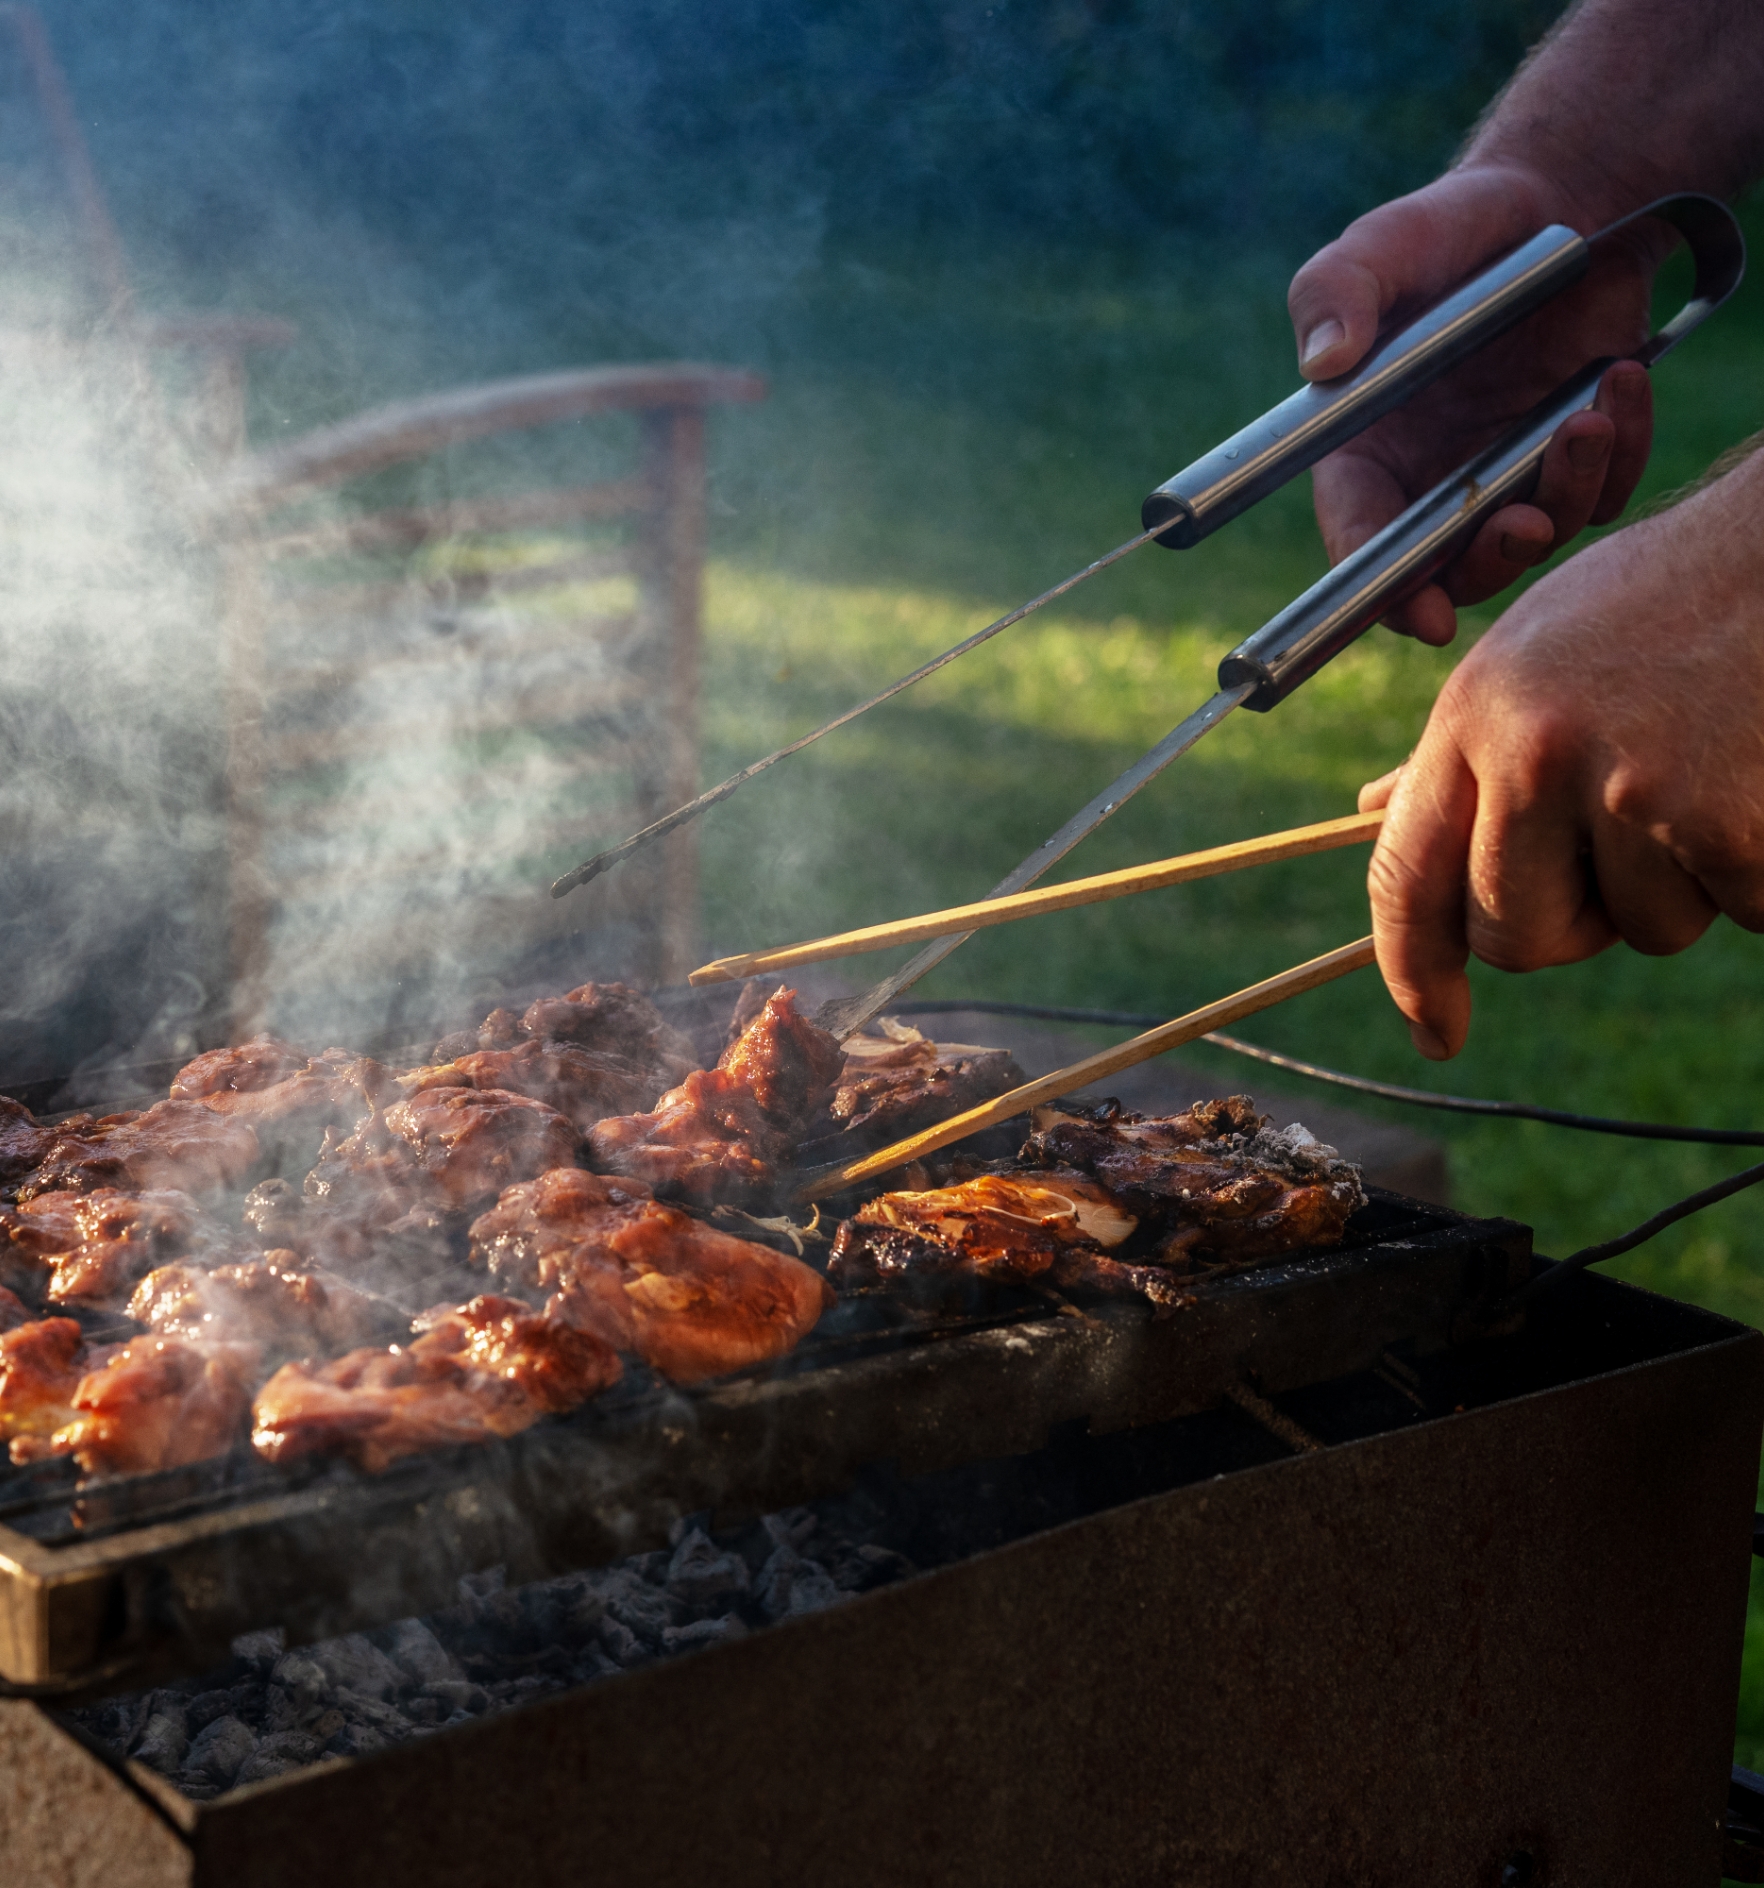 Image showing a man handling meat on a barbecue